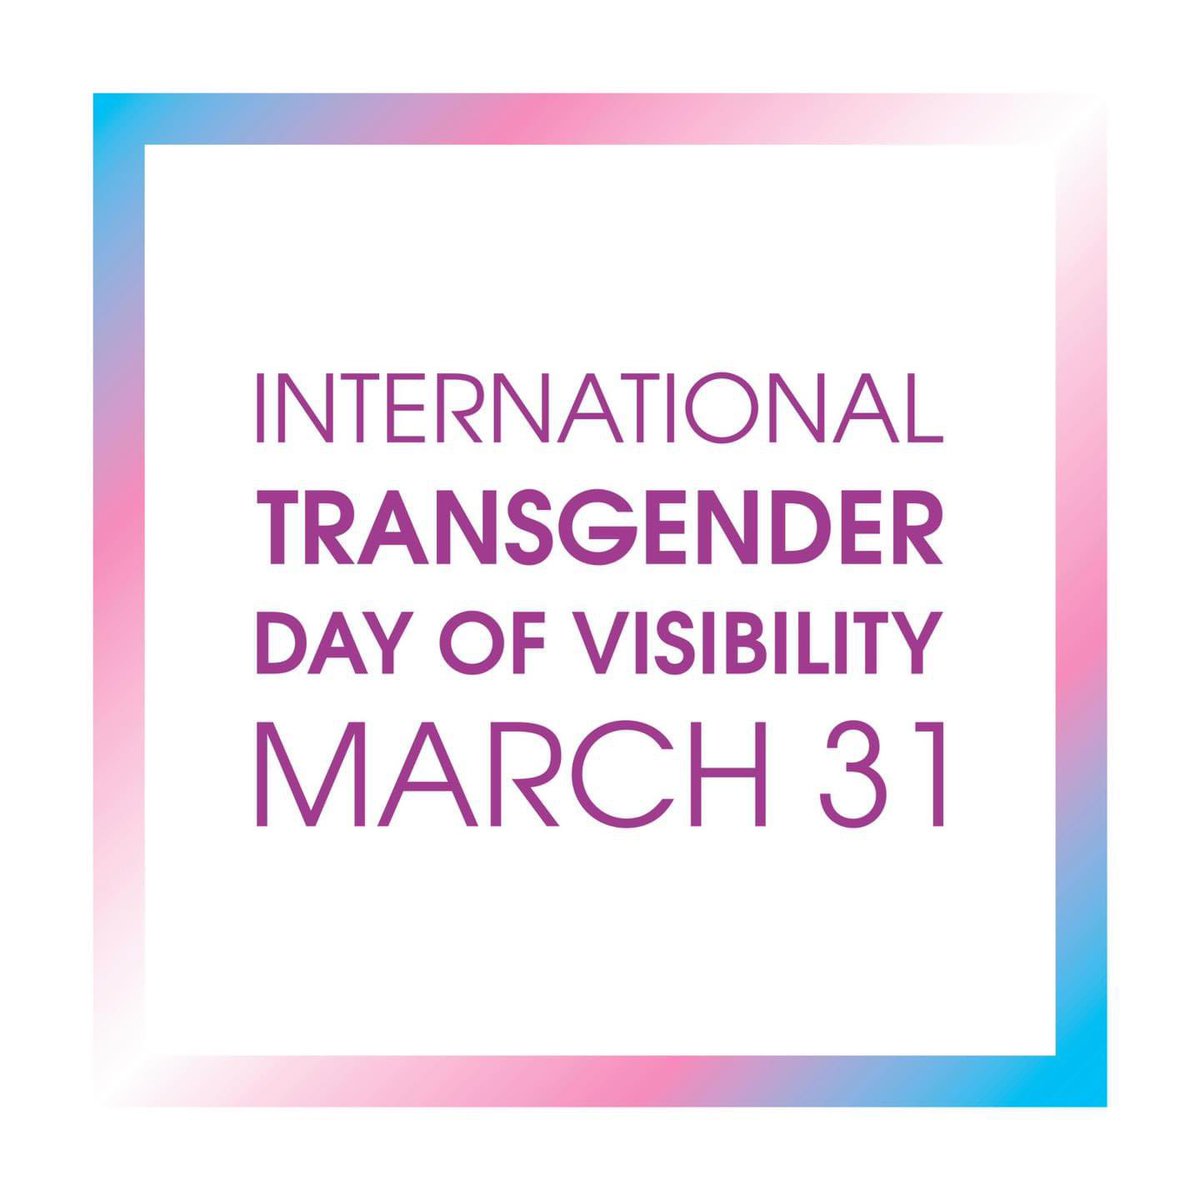 It's #TransDayOfVisibility To all of my trans siblings, I see you & you are loved 🏳️‍⚧️ I will continue to speak out in support of the Trans community & stand against transphobia.  We must not let hate win. 🏳️‍⚧️ #TransPeopleAreLoved 🏳️‍⚧️ #TDOV 🏳️‍⚧️ #TransRightsAreHumanRights 🩵🩷🤍🩷🩵